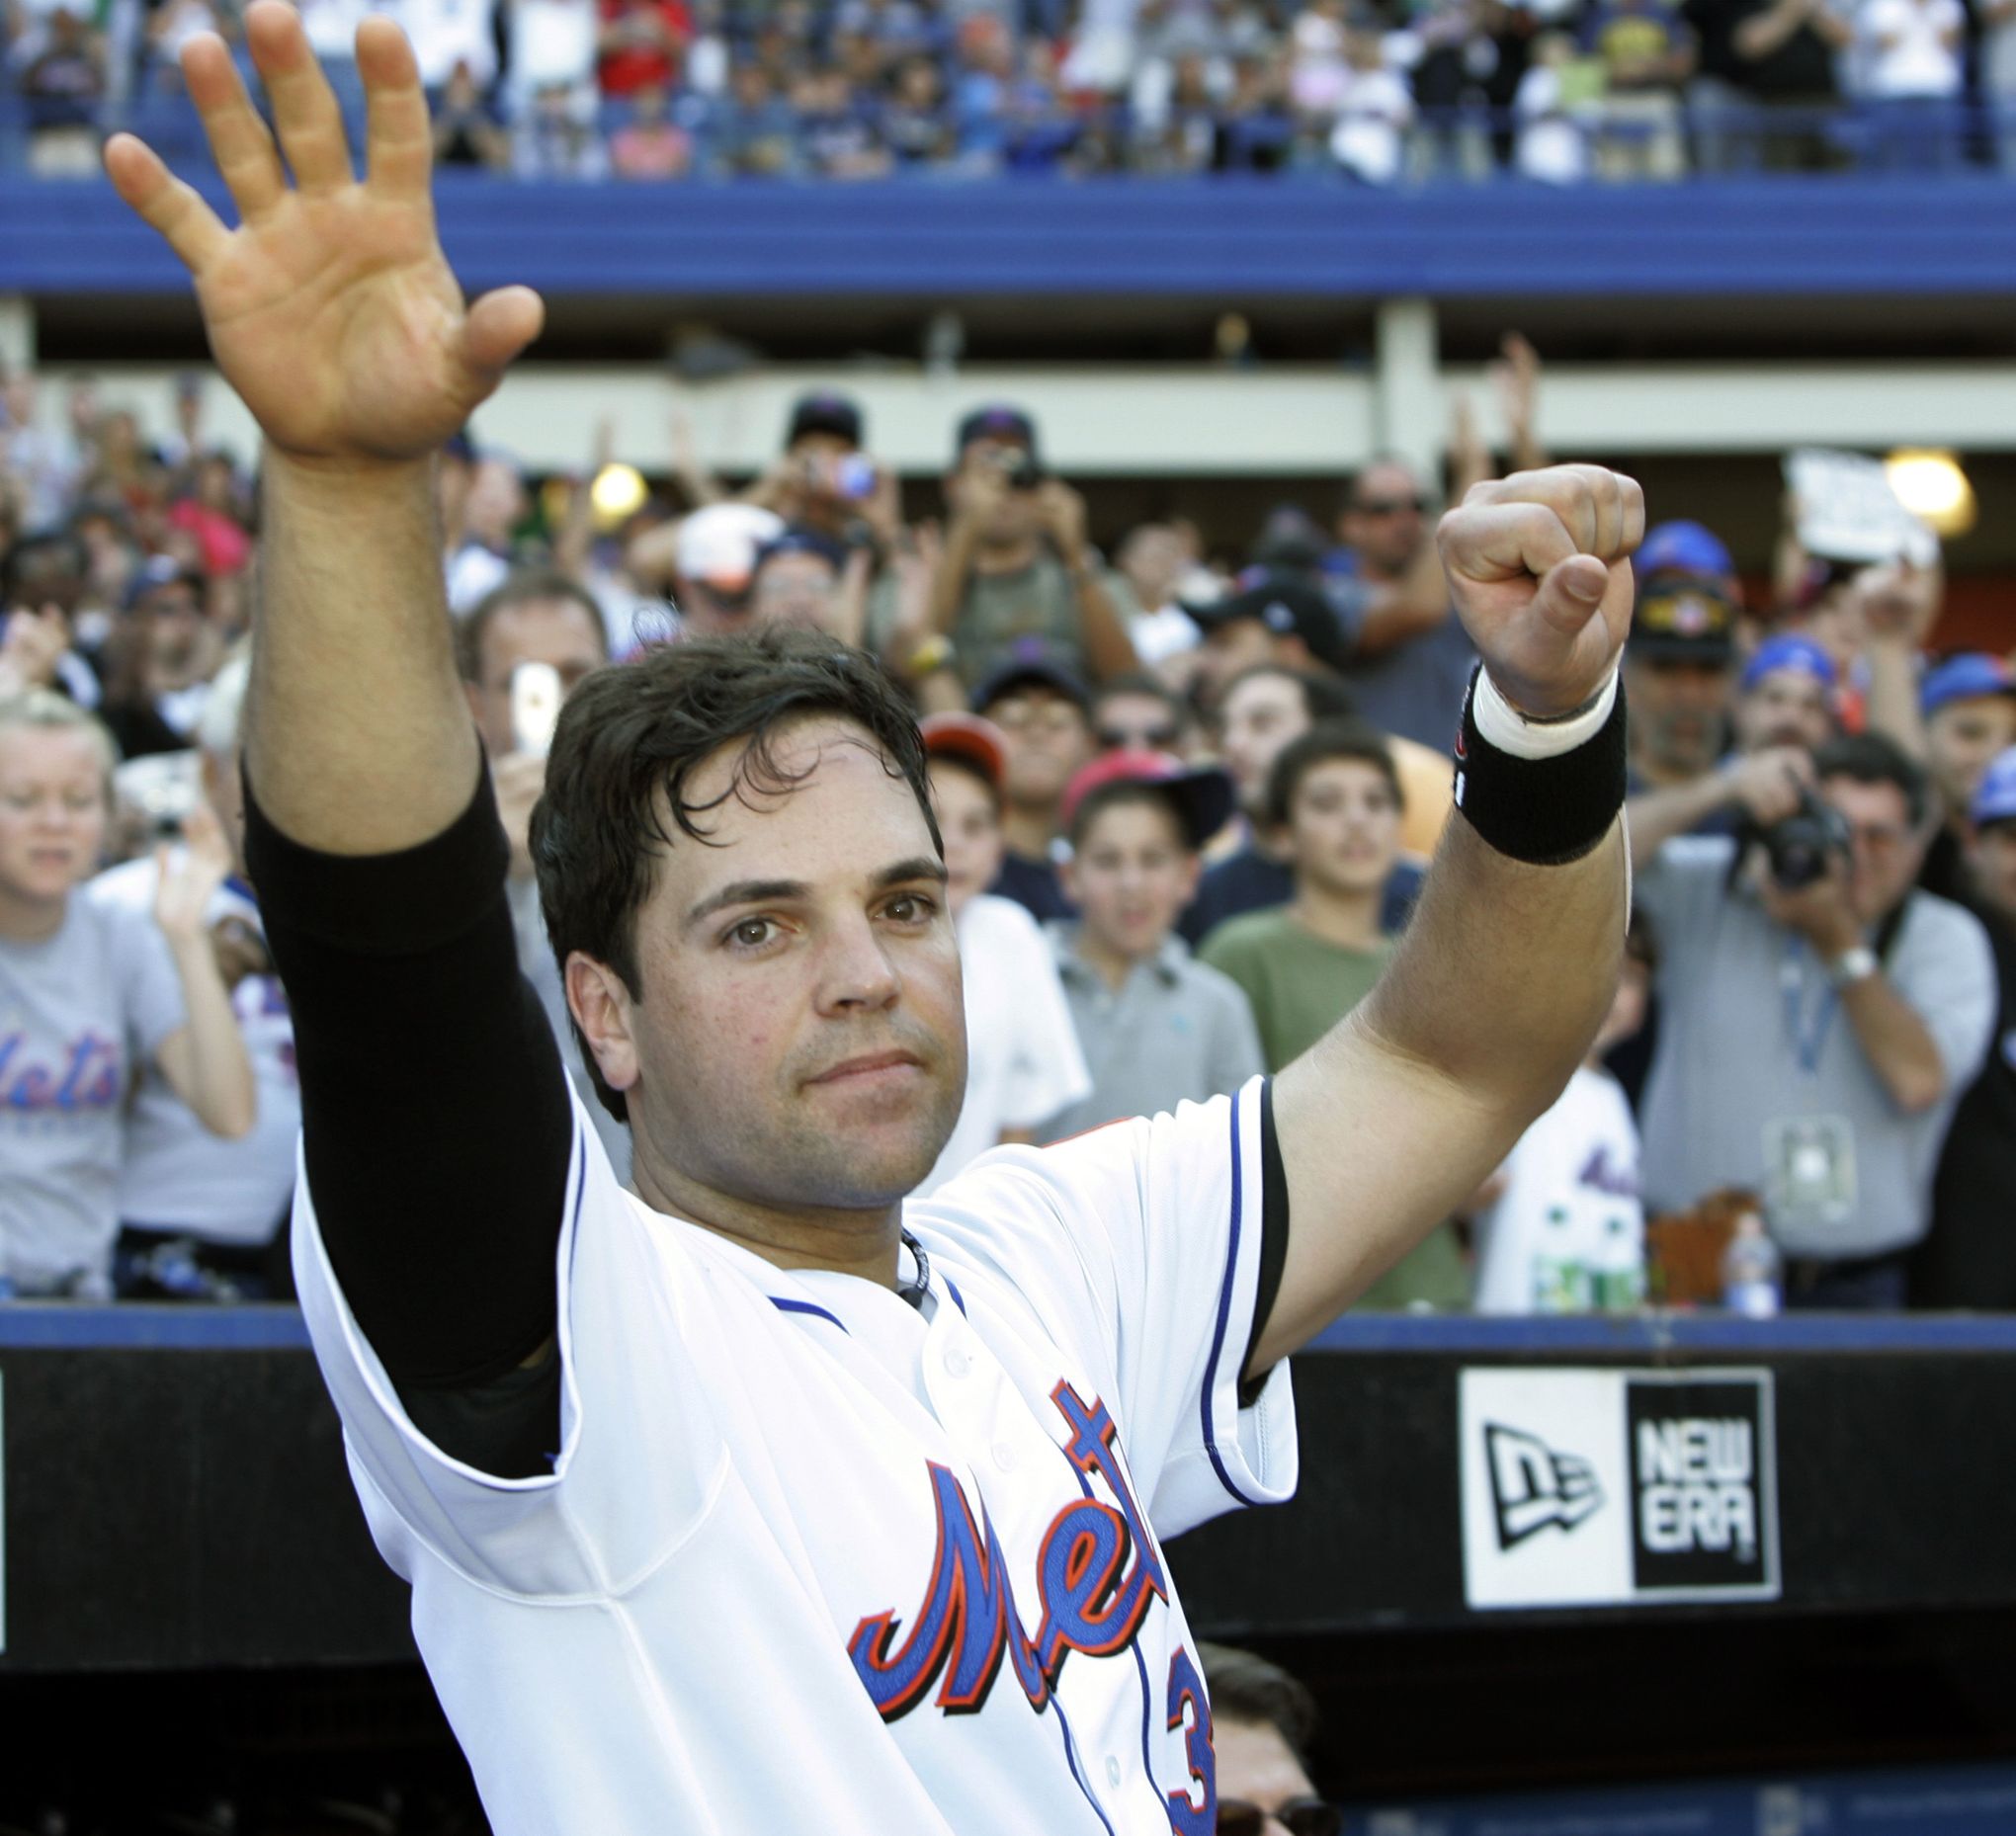 Marlins congratulate 5-game 'Marlins Alum' Mike Piazza on making